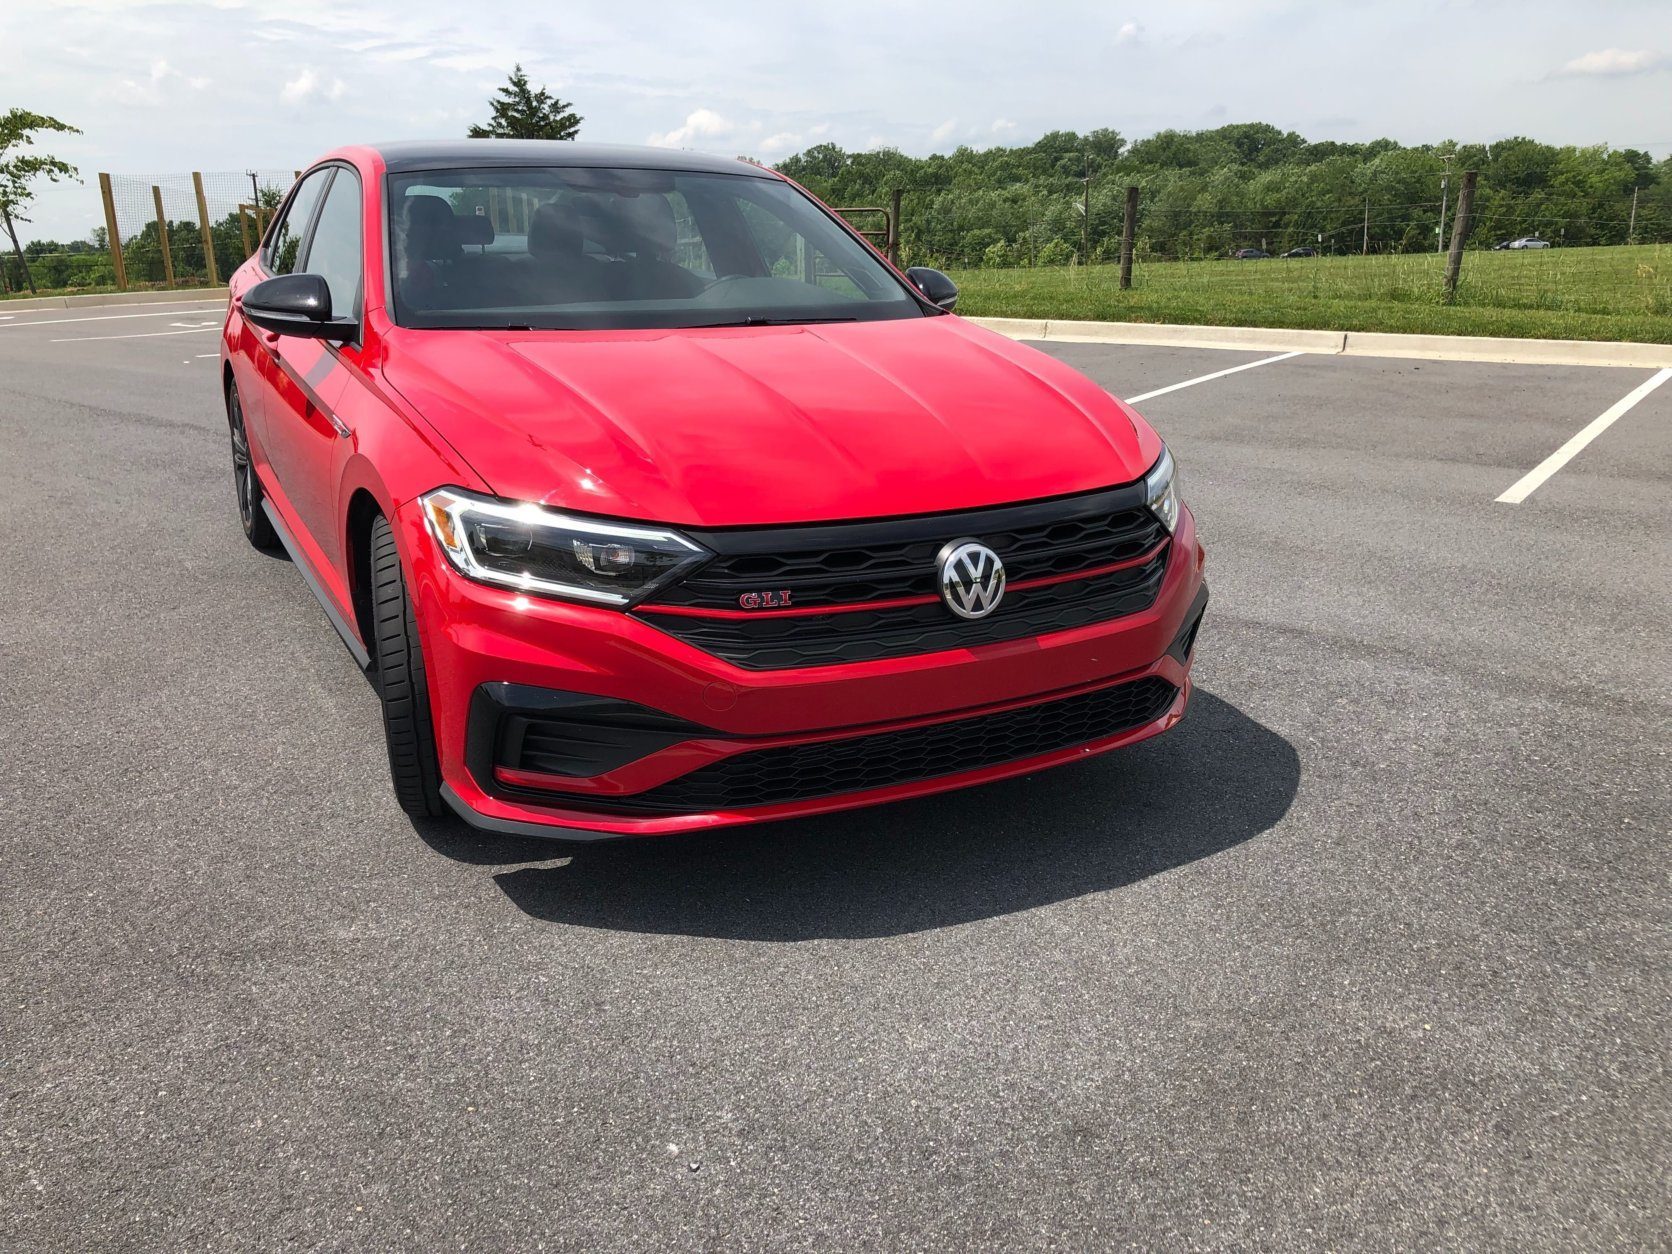 <p>On the outside the 2019 Jetta GLI has been transformed from plain sedan to a sporty one with just a few changes. A more aggressive front end with a blacked-out grill signals this is “no plain Jane” Jetta.</p>
<p>There are unique badges and red lines on the wheels and the front grill. Those touches might be a little boy racer for me, but it adds to a playful sedan that looks like it cost more than the sub $28,000 price tag.</p>
